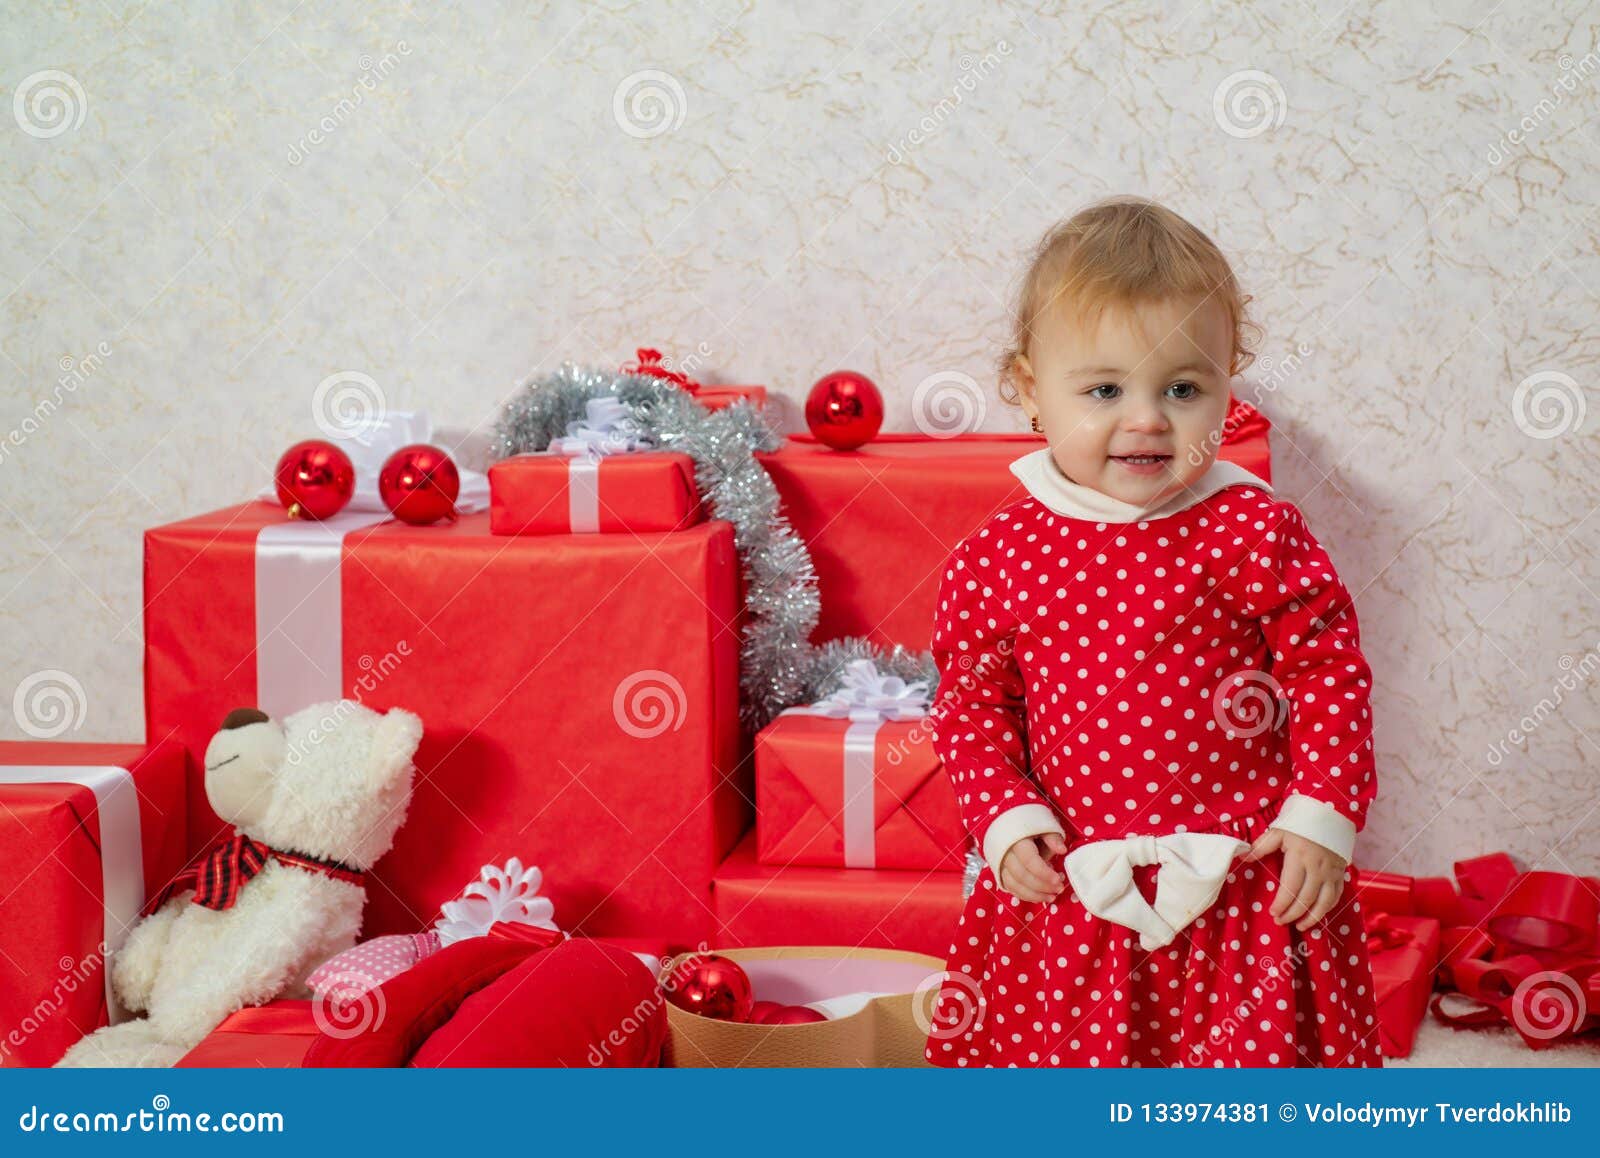 Happy Children. Celebraties Concept. Cute Babies With A Red Present Box ...